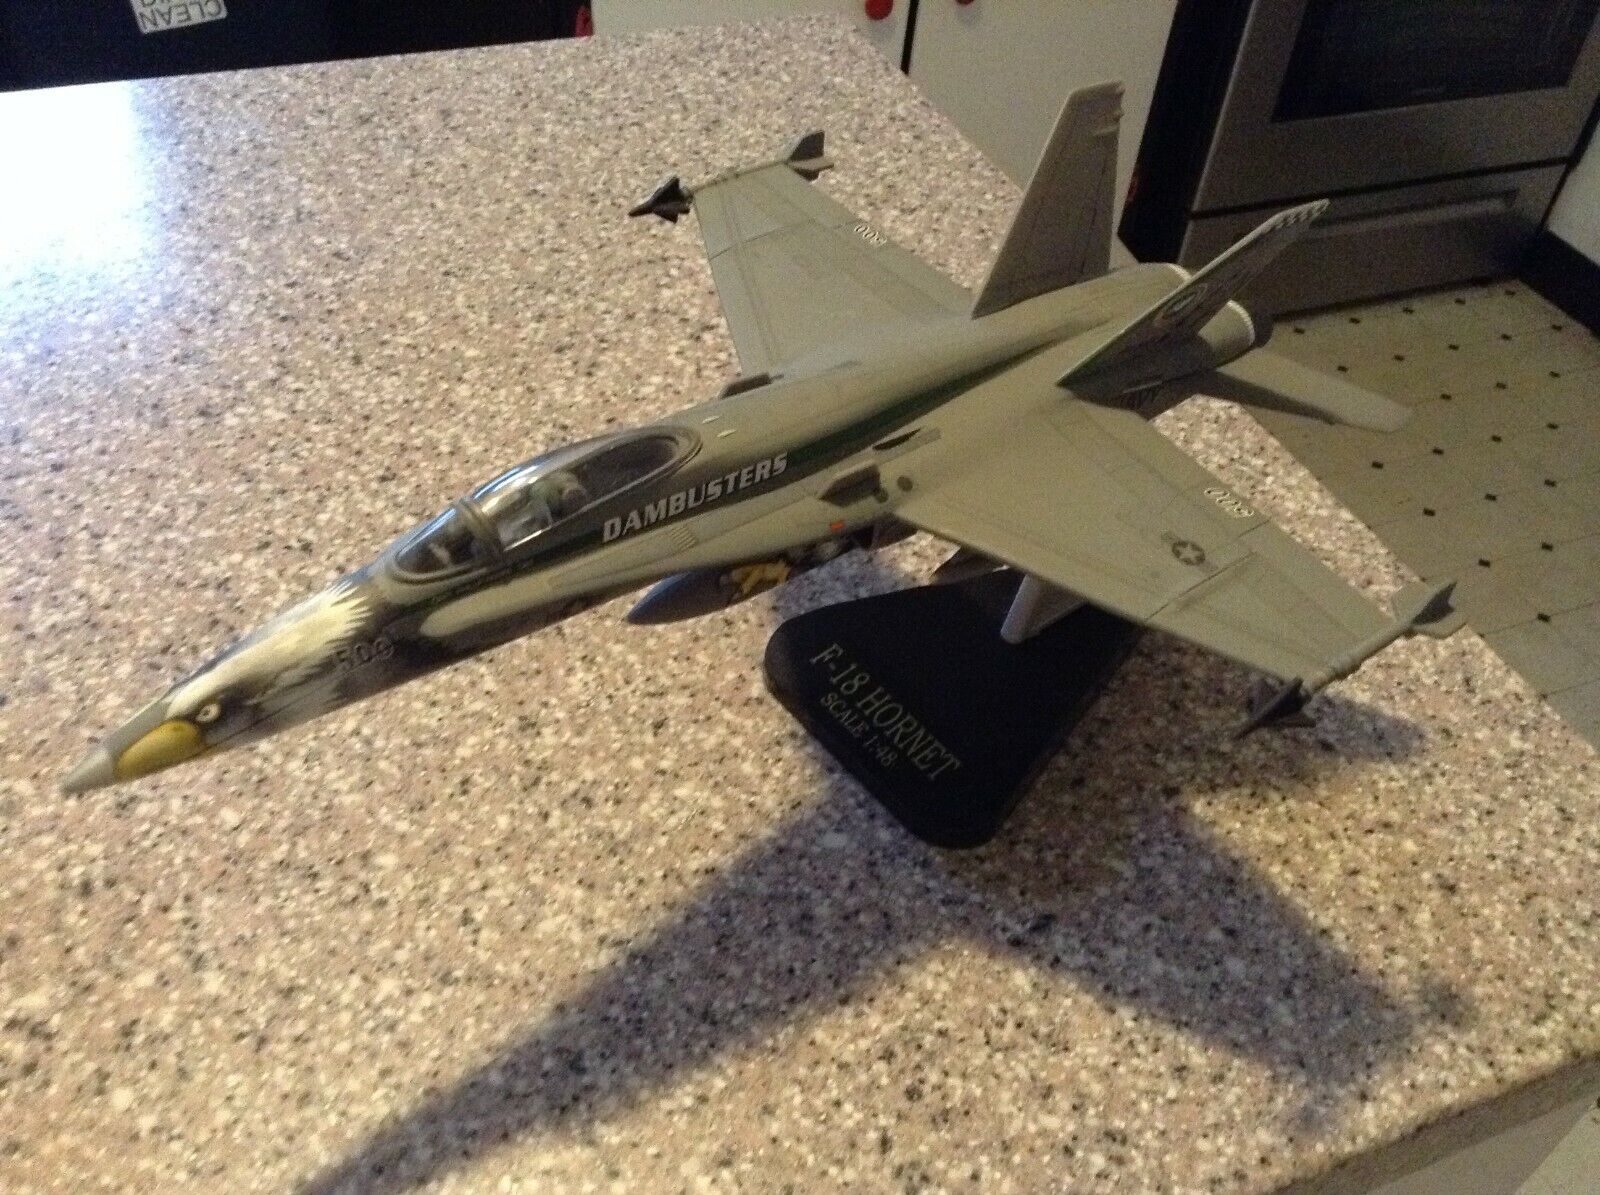 F-18 Hornet metal 1:48 on stand  Exc Condition